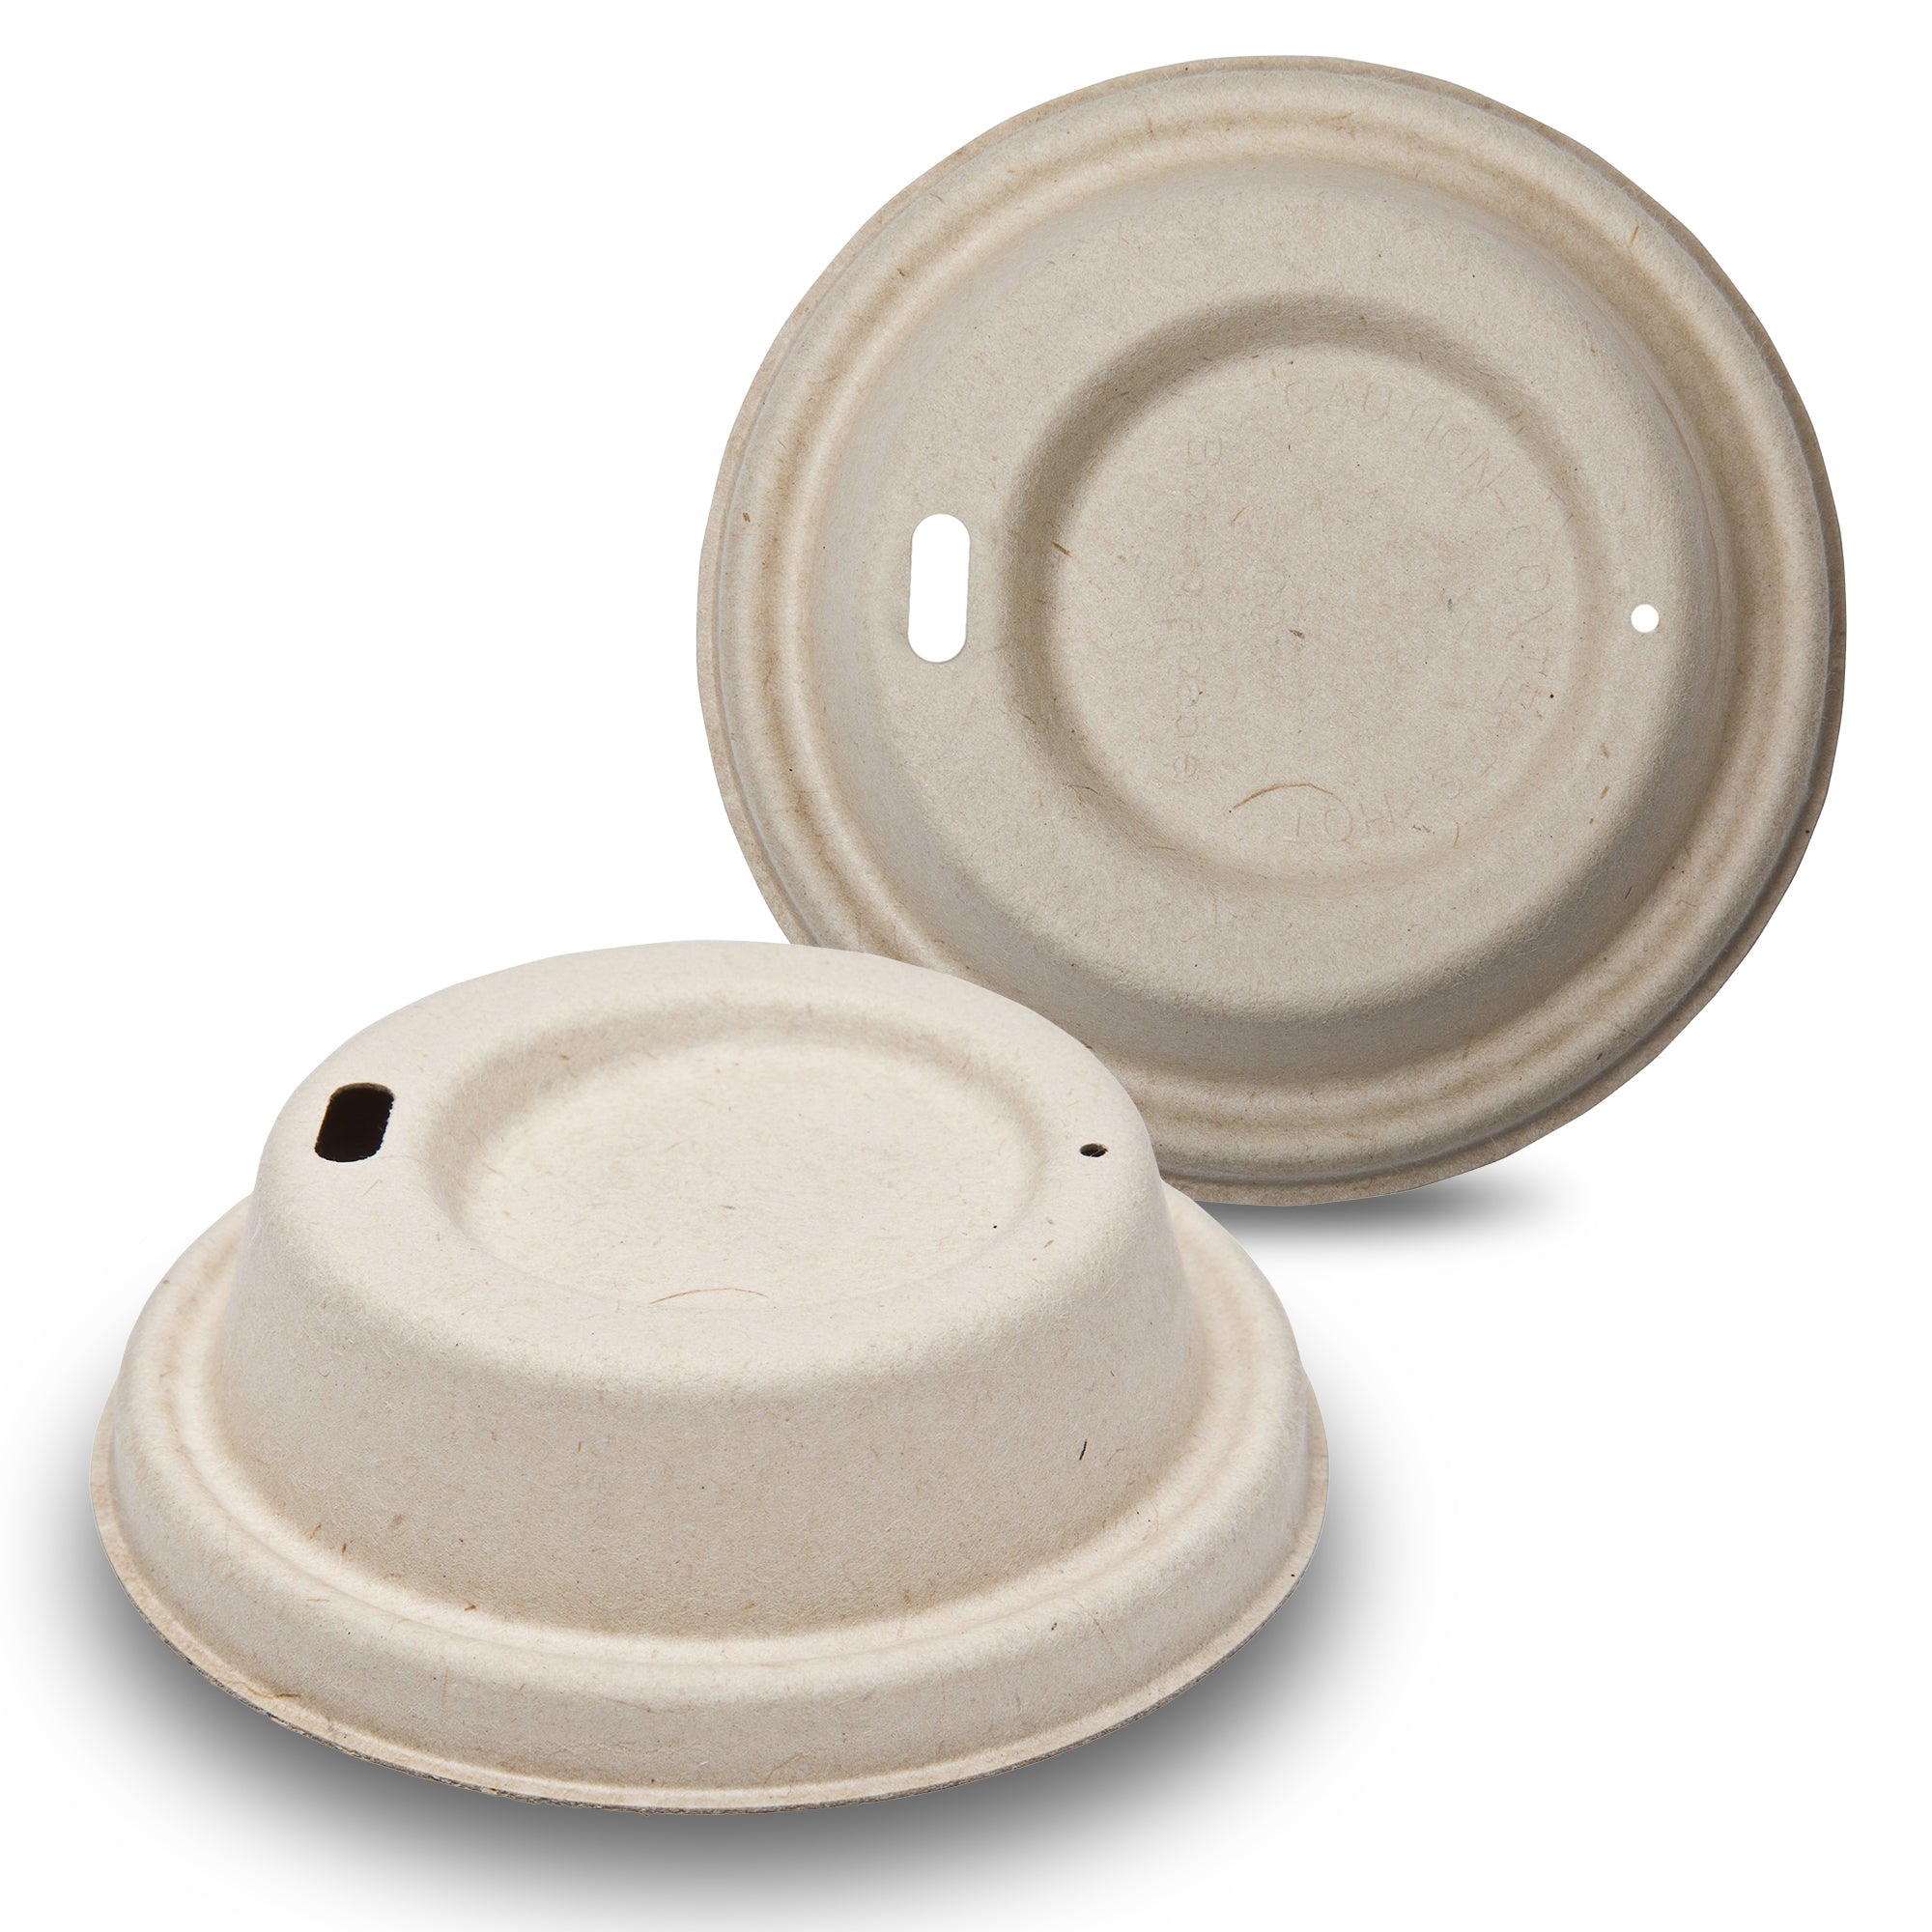 80mm Home Compostable Pulp lid fits size 6oz and 8oz